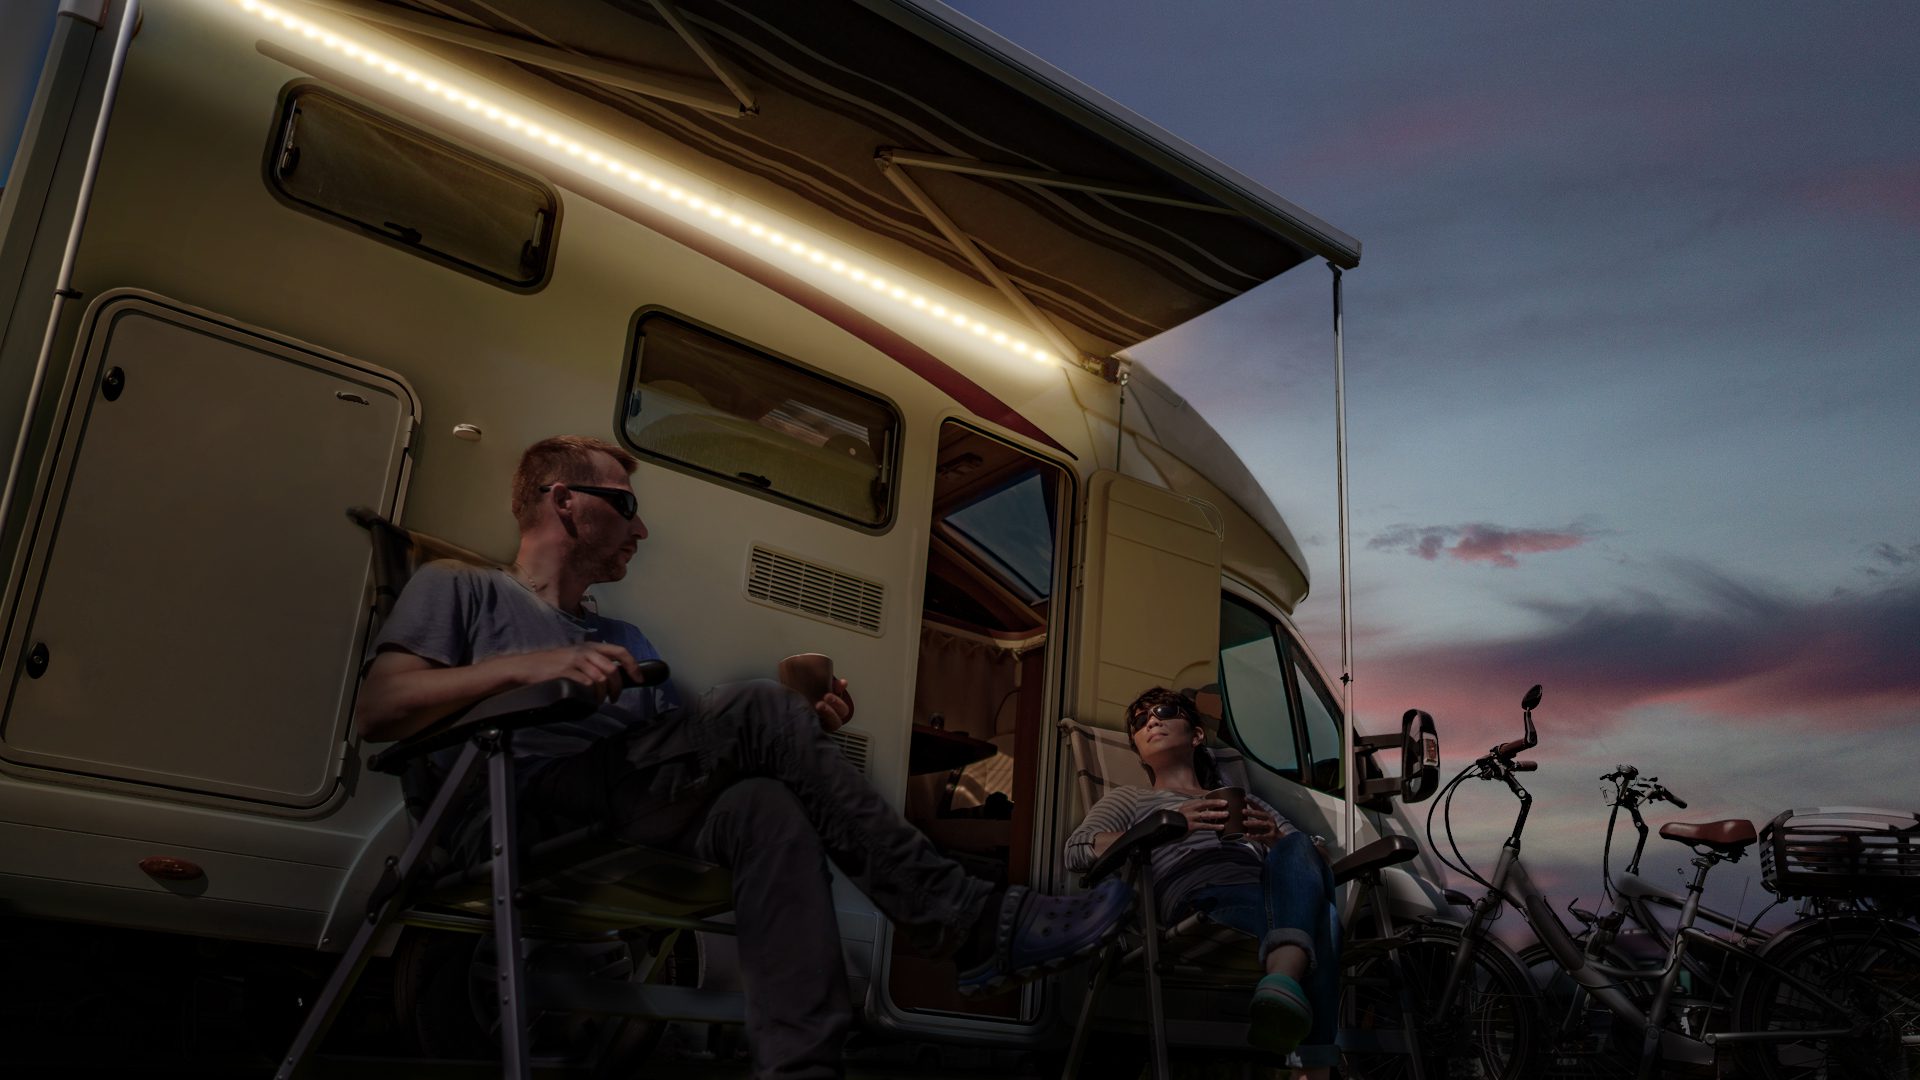 9 Reasons Why You Should Consider LED Light Strips for RV